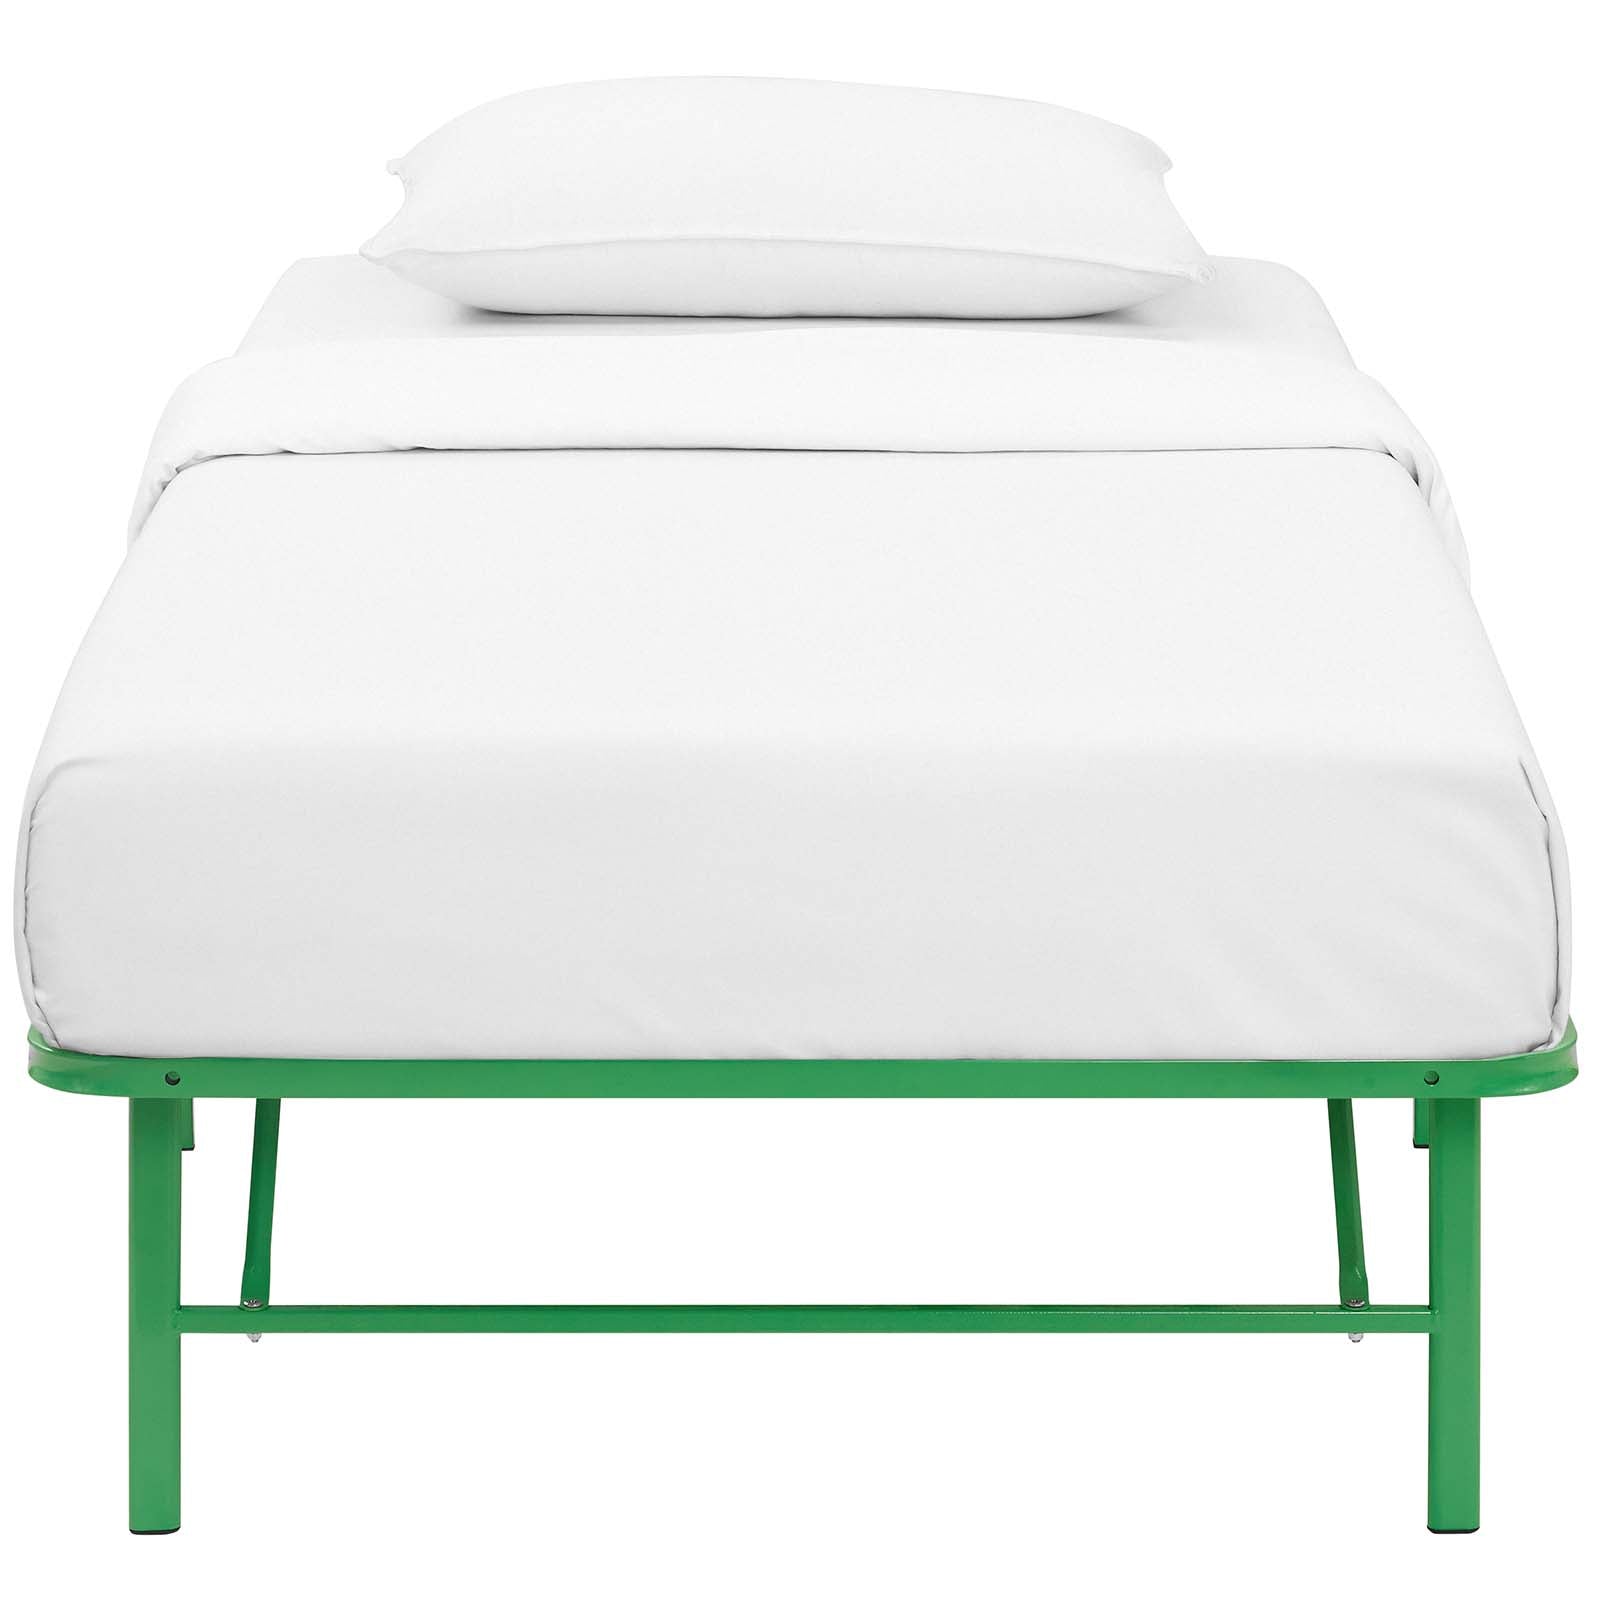 Modway Beds - Horizon Twin Stainless Steel Bed Frame Green